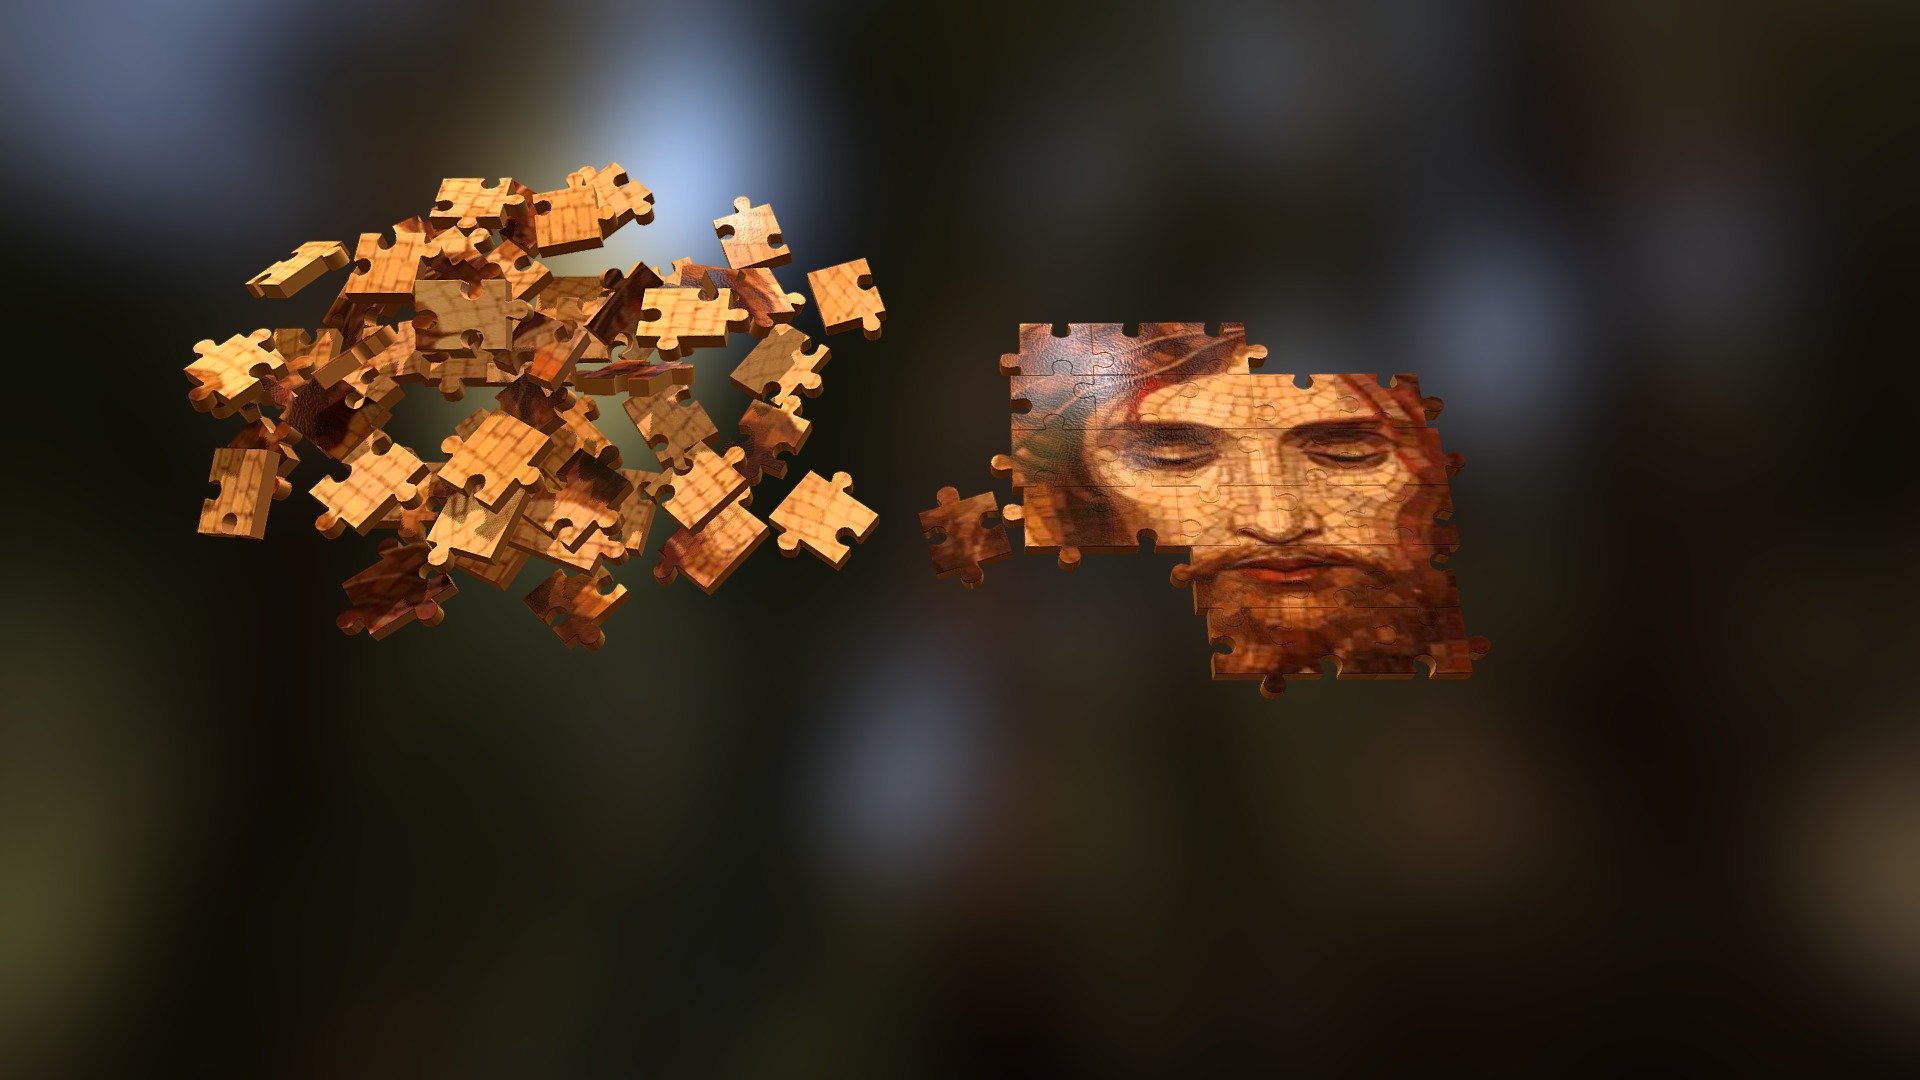 3ds max hight poly model
80 pieces
unwrapped - Jesus Puzzle - Buy Royalty Free 3D model by pinotoon 3d model